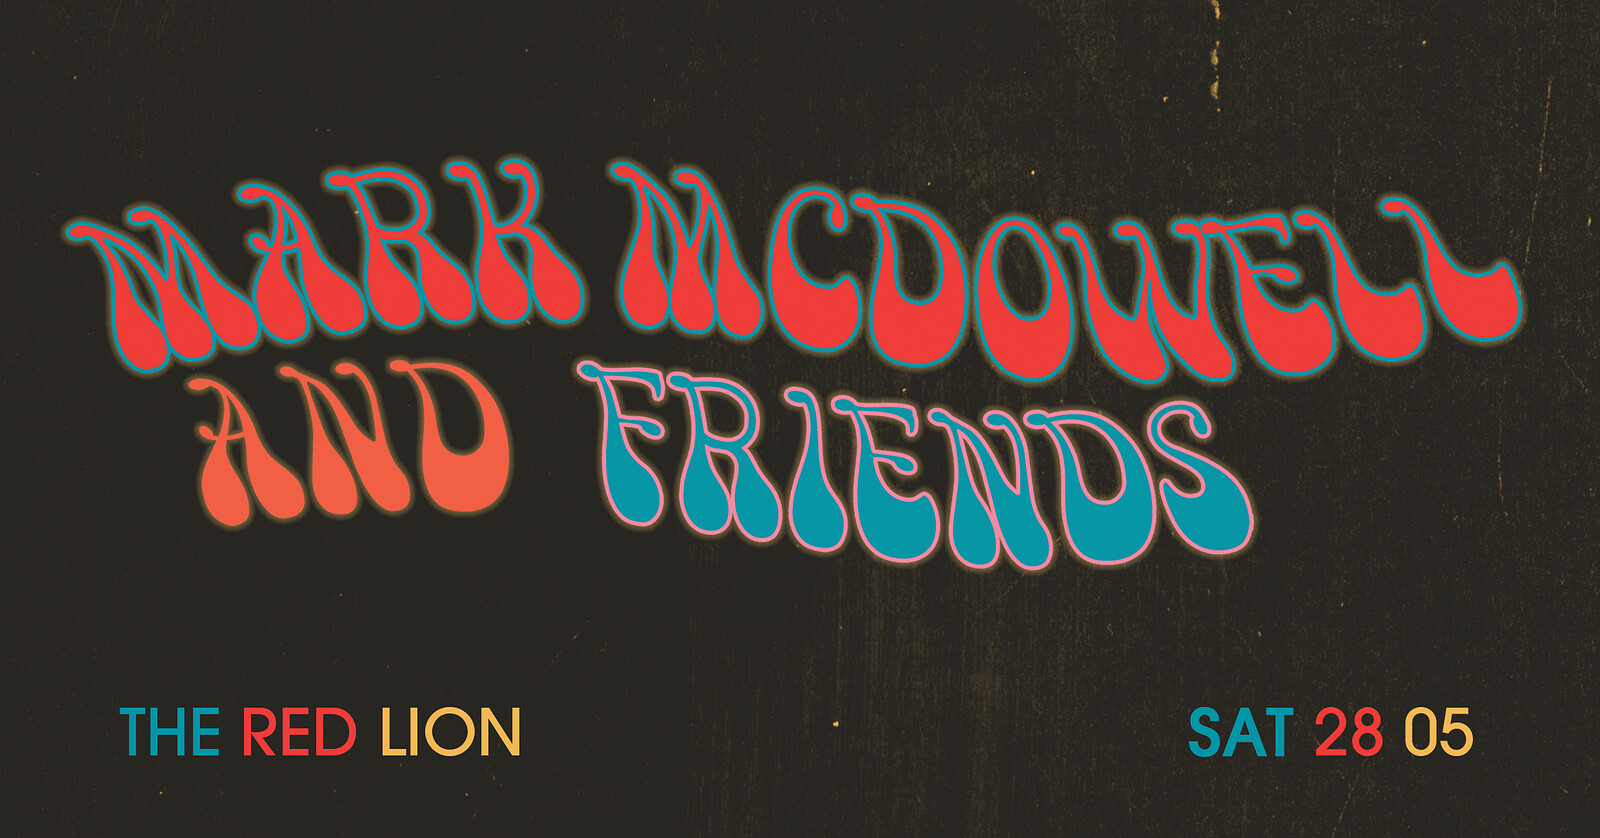 Mark McDowell and Friends + DJ's at The Red Lion